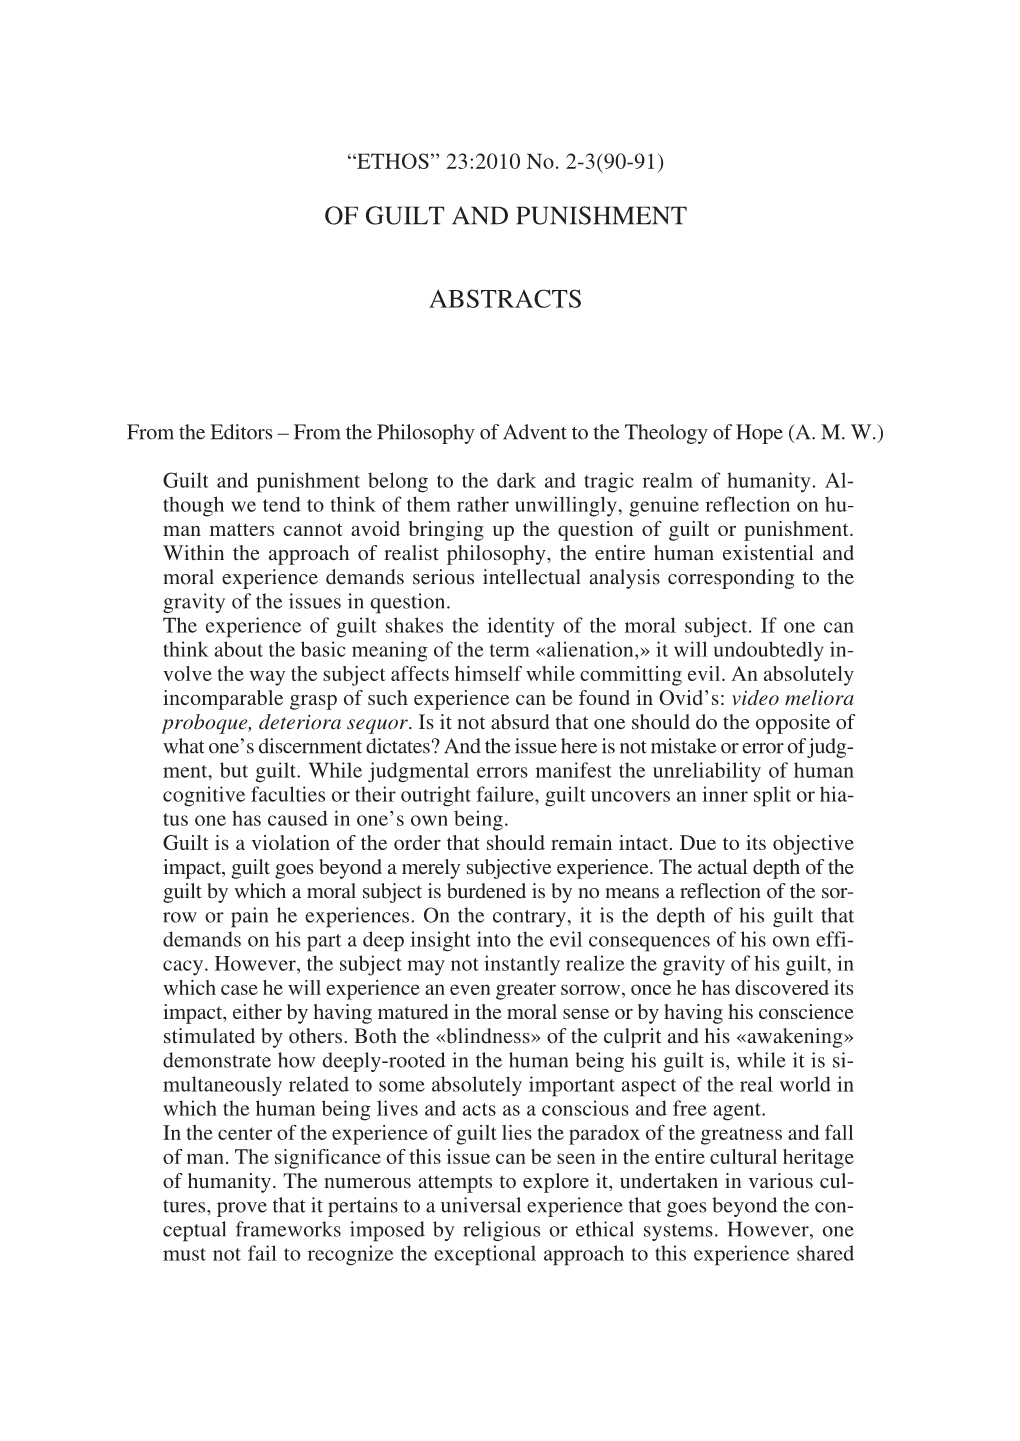 Of Guilt and Punishment Abstracts